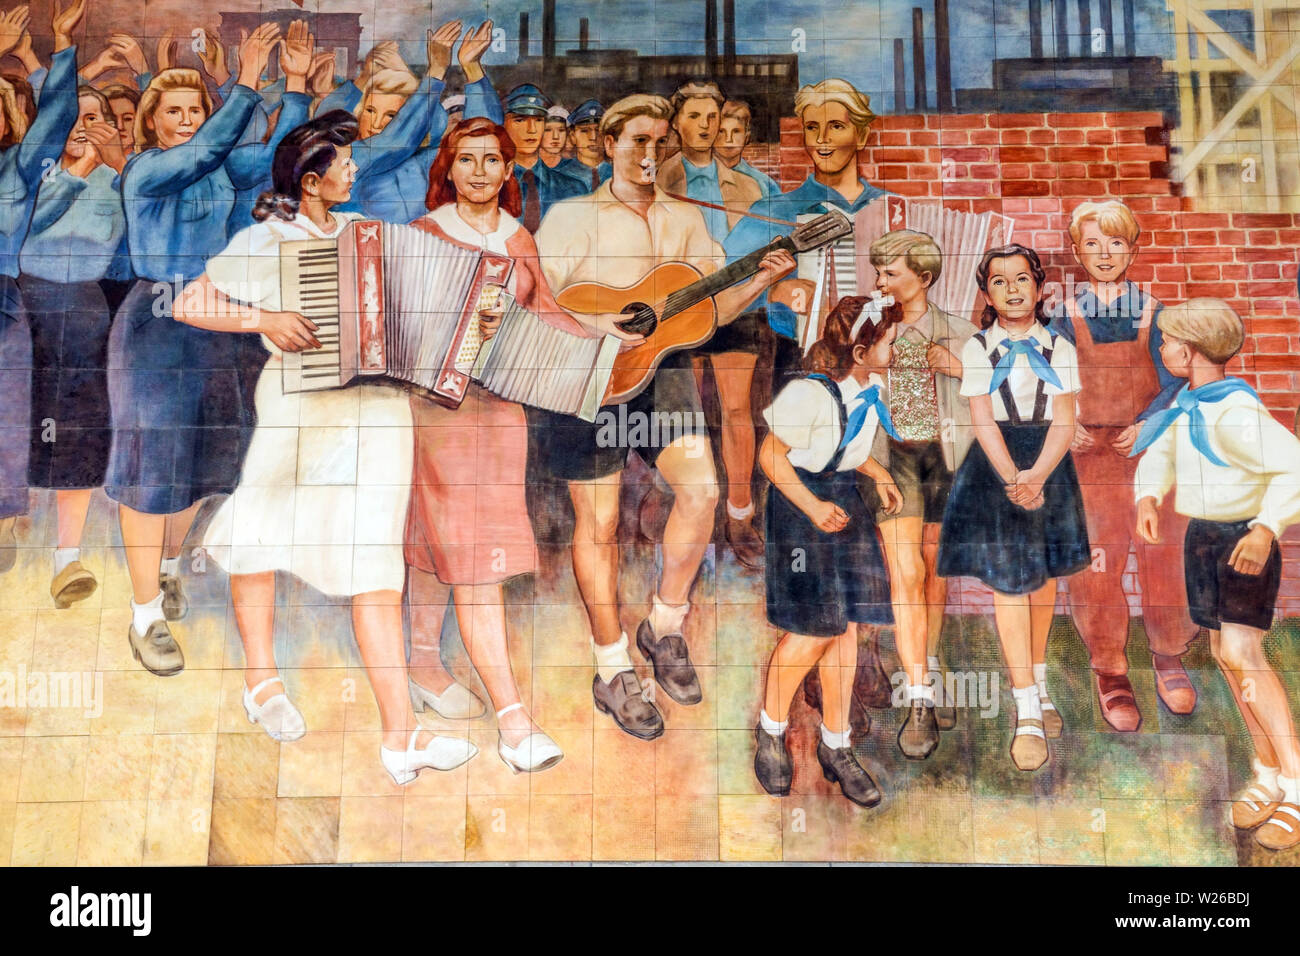 Detail, Pioneers GDR Socialist realism art from the time of the Communist German Republic Ministry of Finance, Berlin Germany Communist art Propaganda Stock Photo